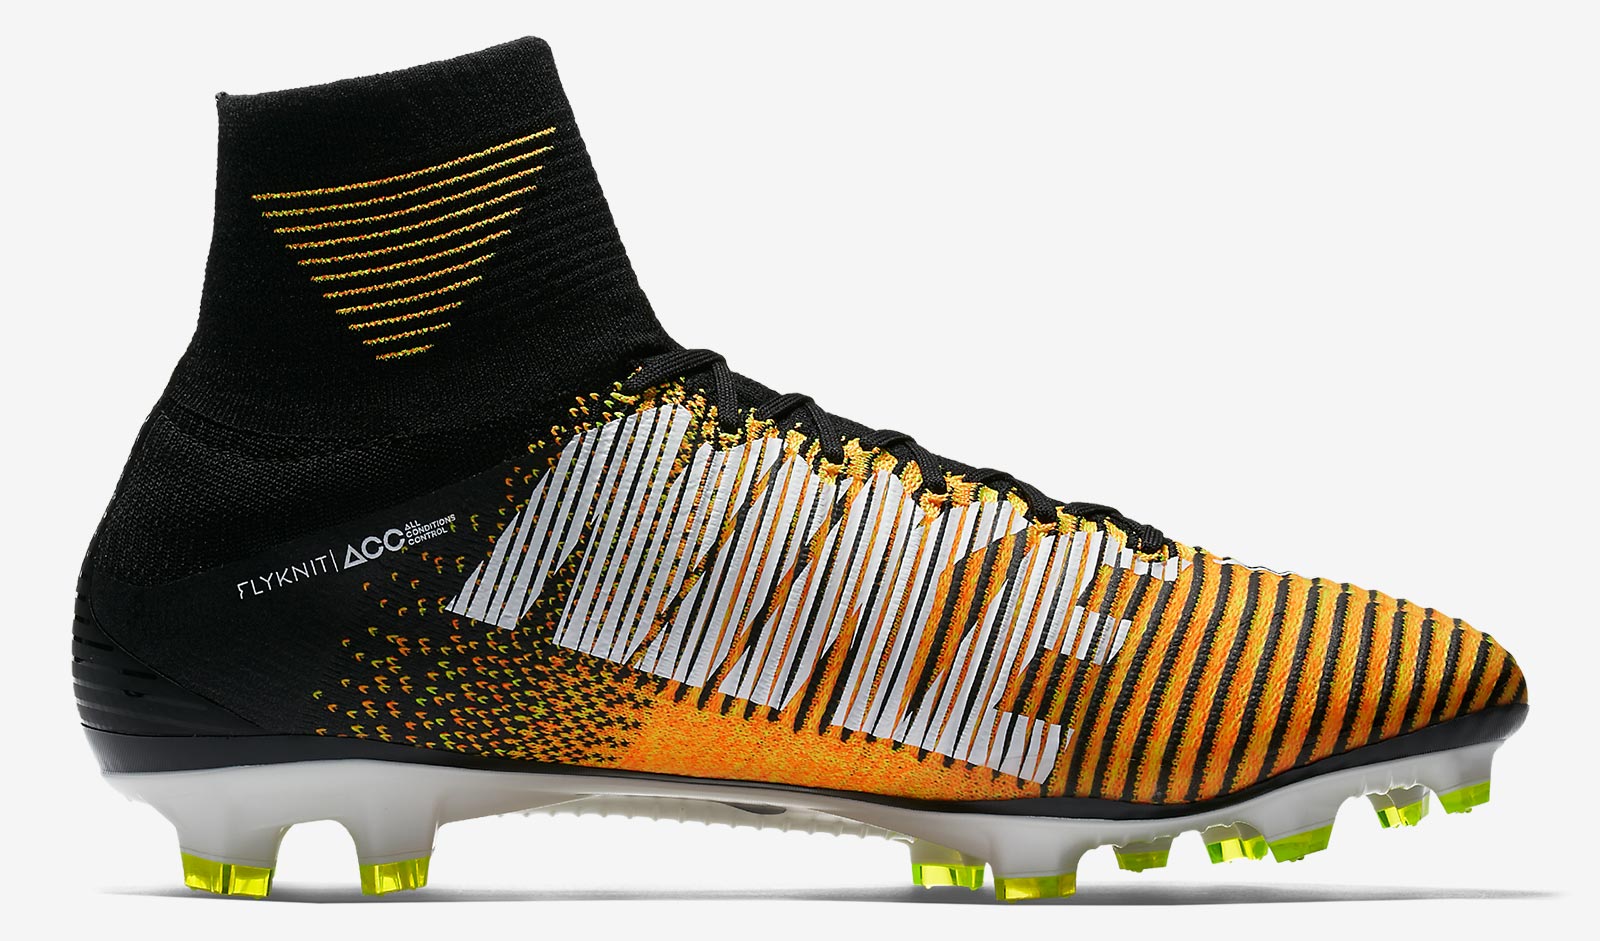 Nike Mercurial Superfly V 'Lock In Let Loose' Boots Revealed -